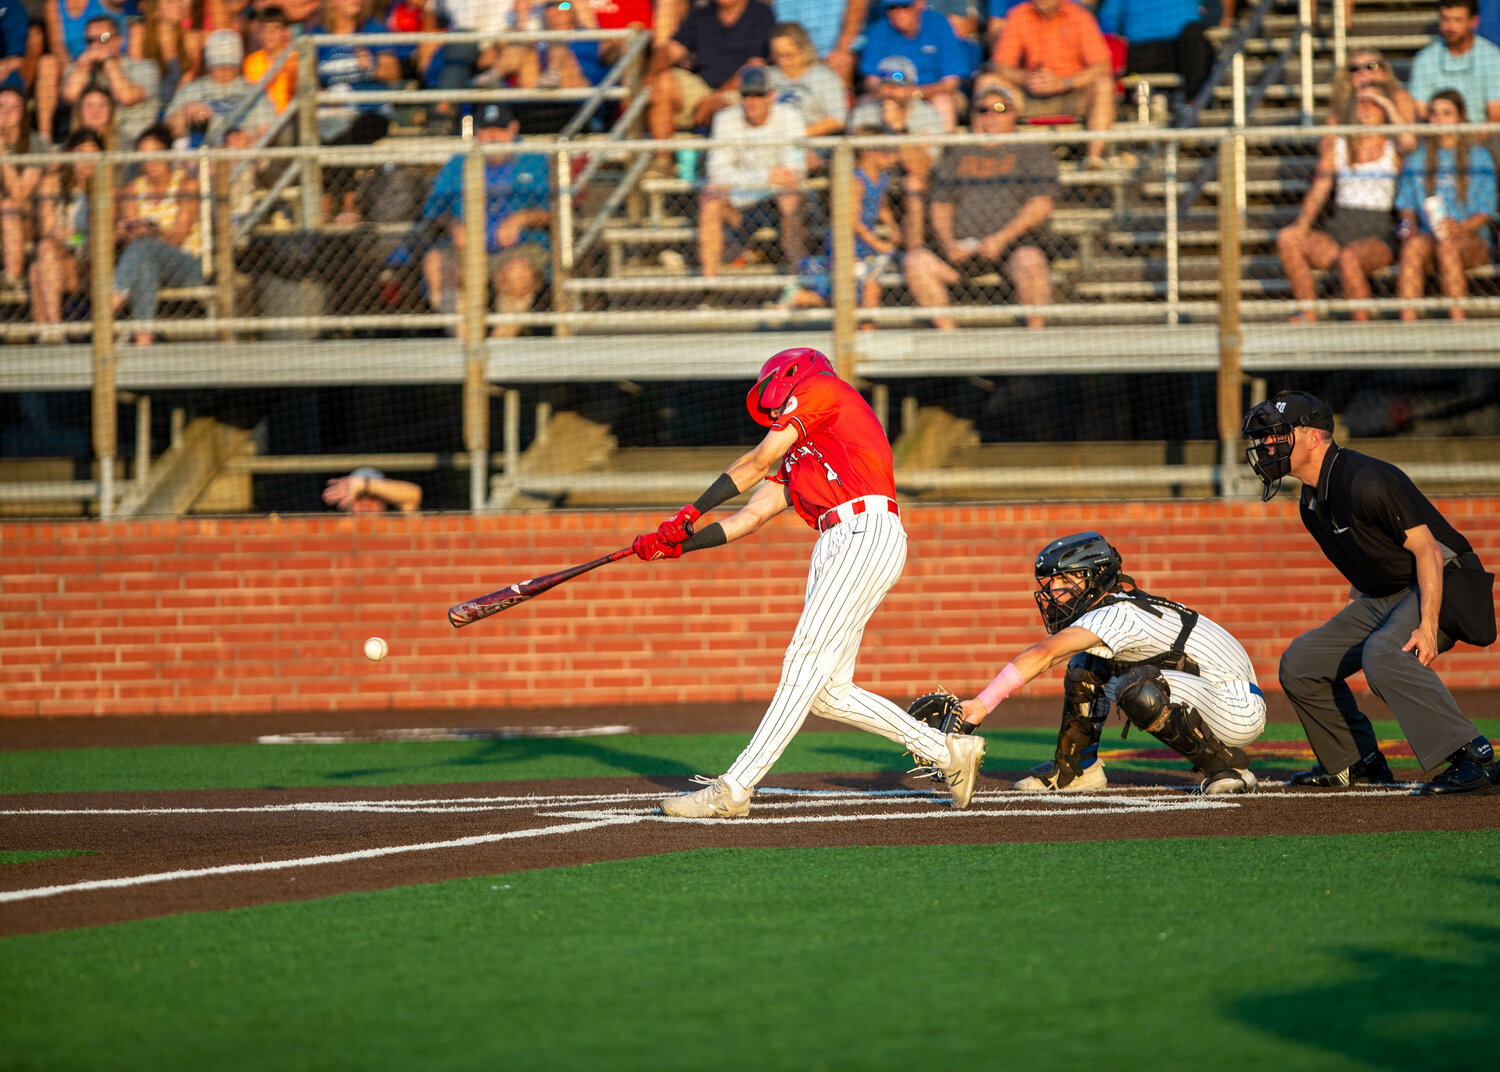 Andrew Hilton hits during Wednesday's Regional Semifinal between Katy and Clear Springs at Deer Park.